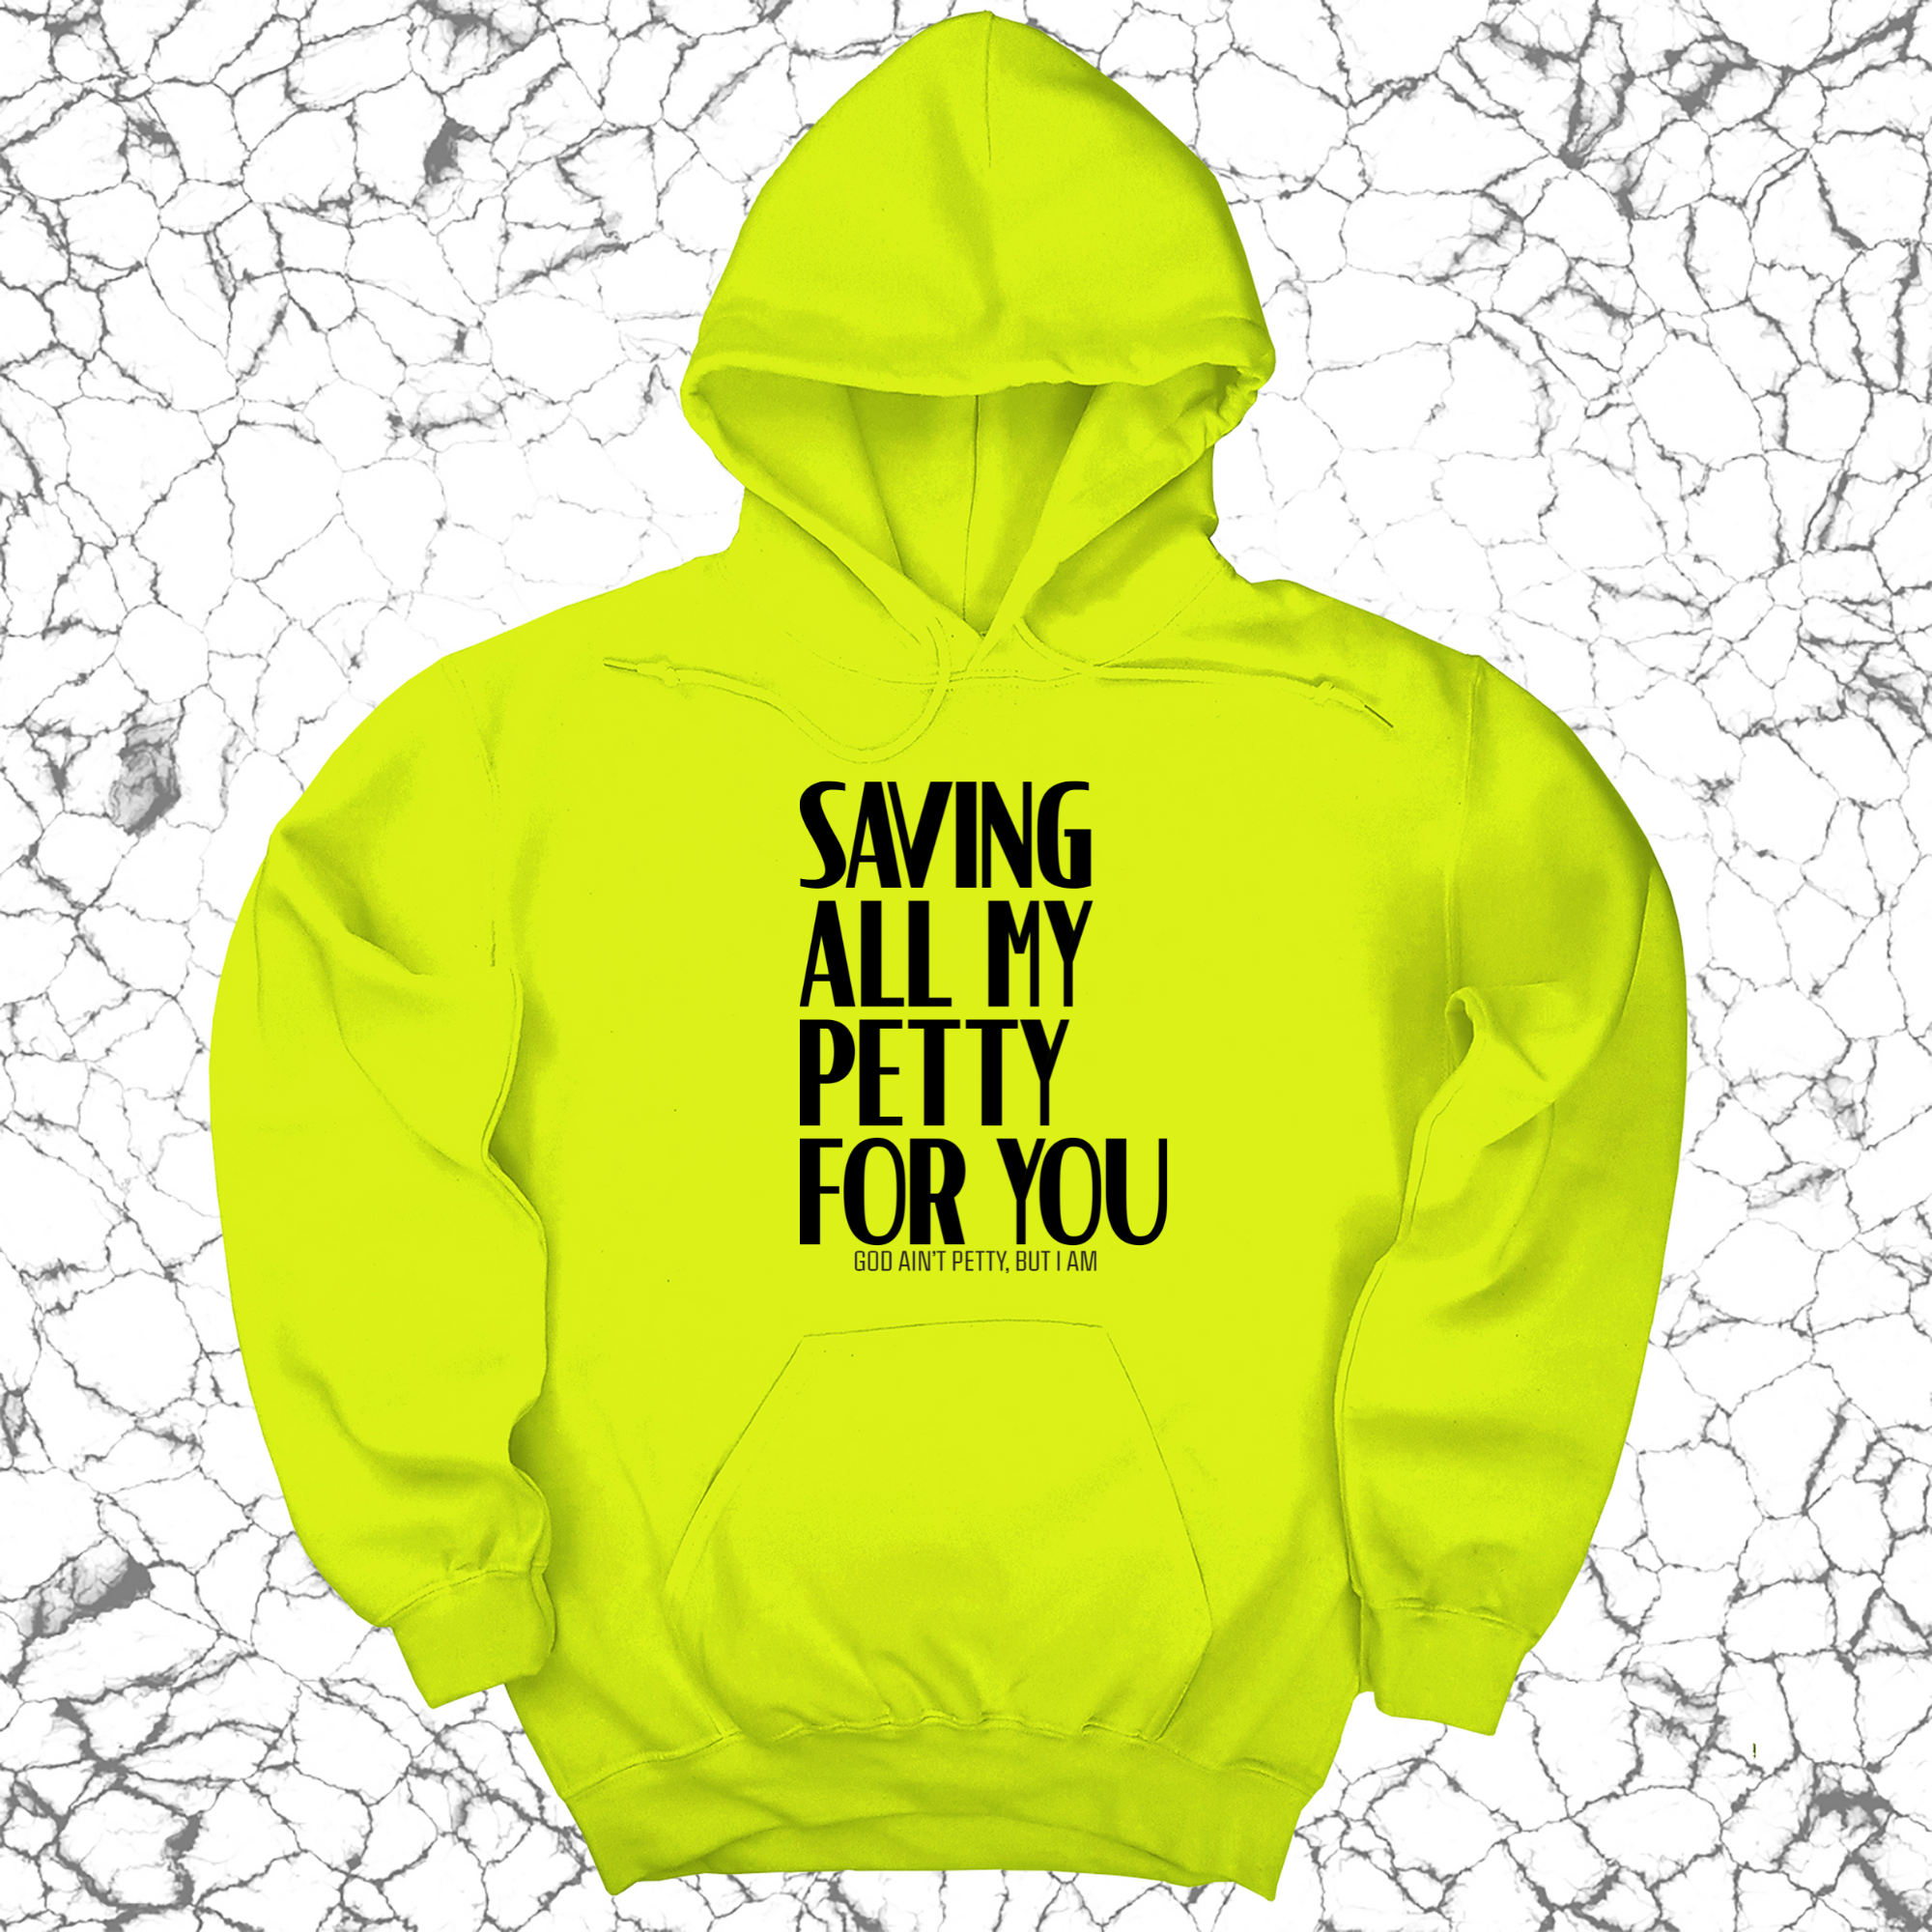 Saving all my Petty for you Unisex Hoodie-Hoodie-The Original God Ain't Petty But I Am